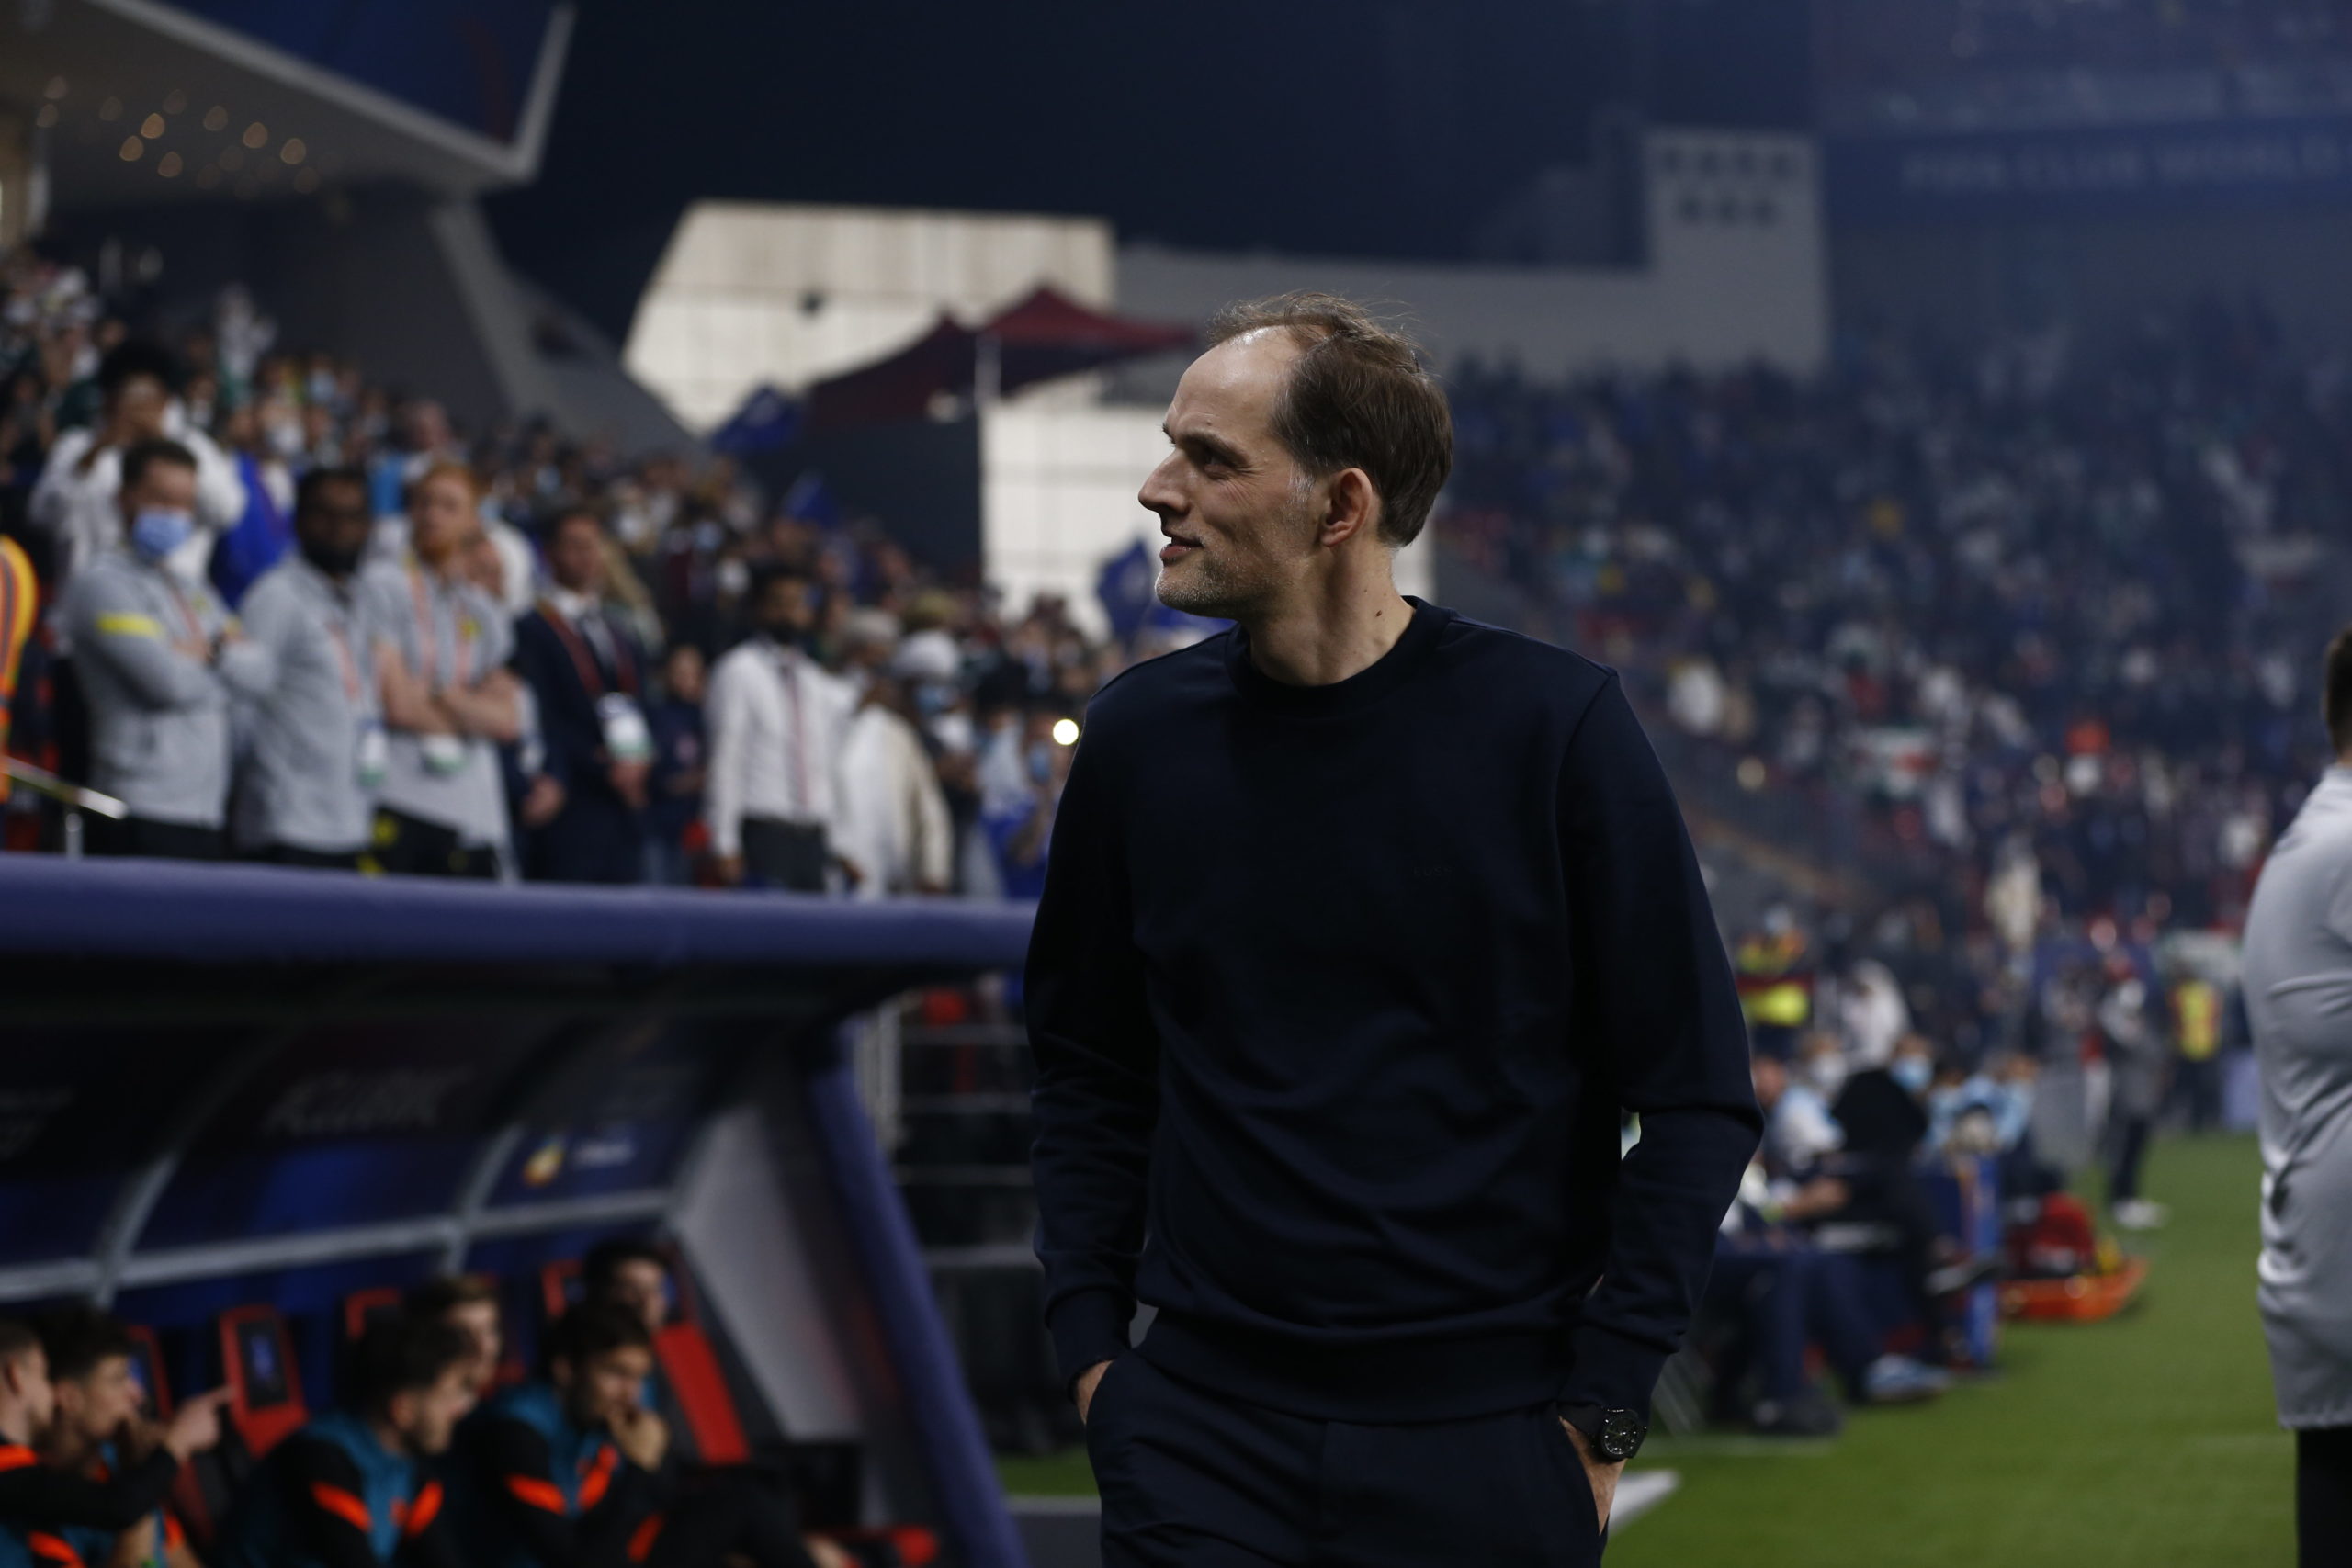 TCC View: Tuchel may switch formation next season based on Chelsea's reported summer plans